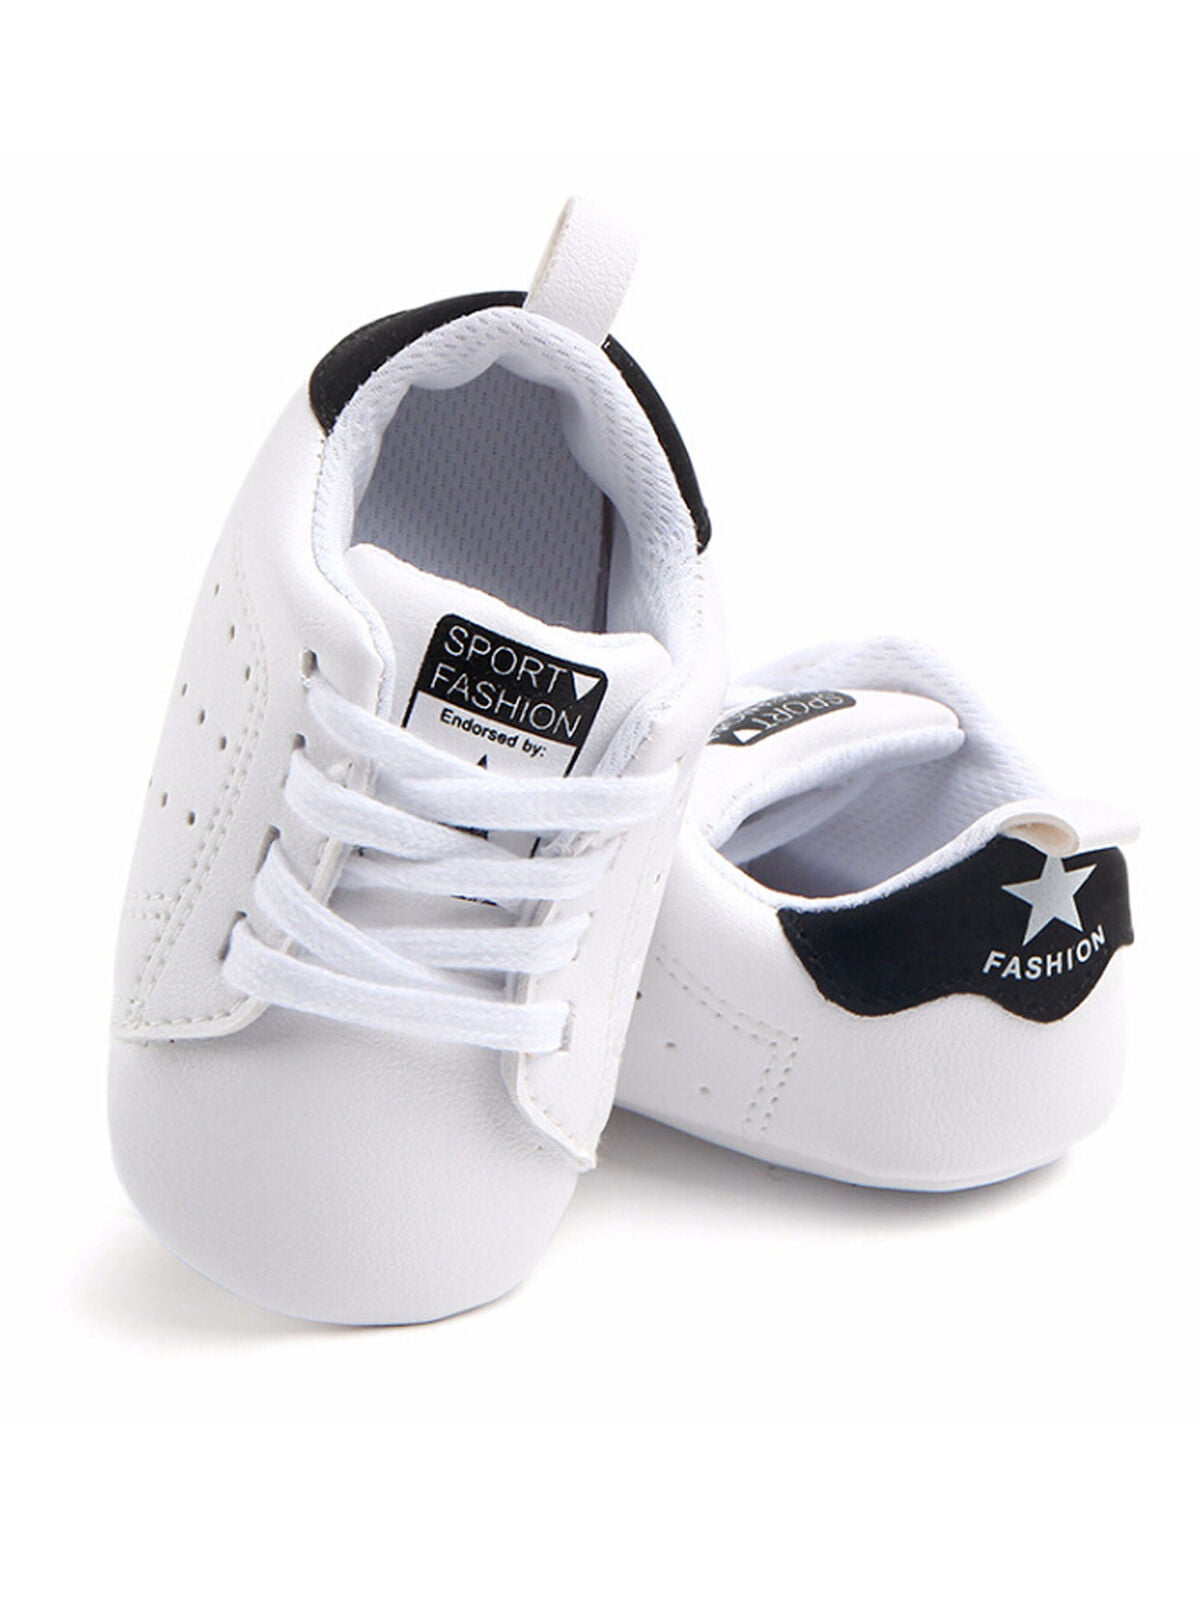 Infant Newborn Baby Boy Girl Soft Sole Laceup PU Pram Shoes Trainers 0-18Months 